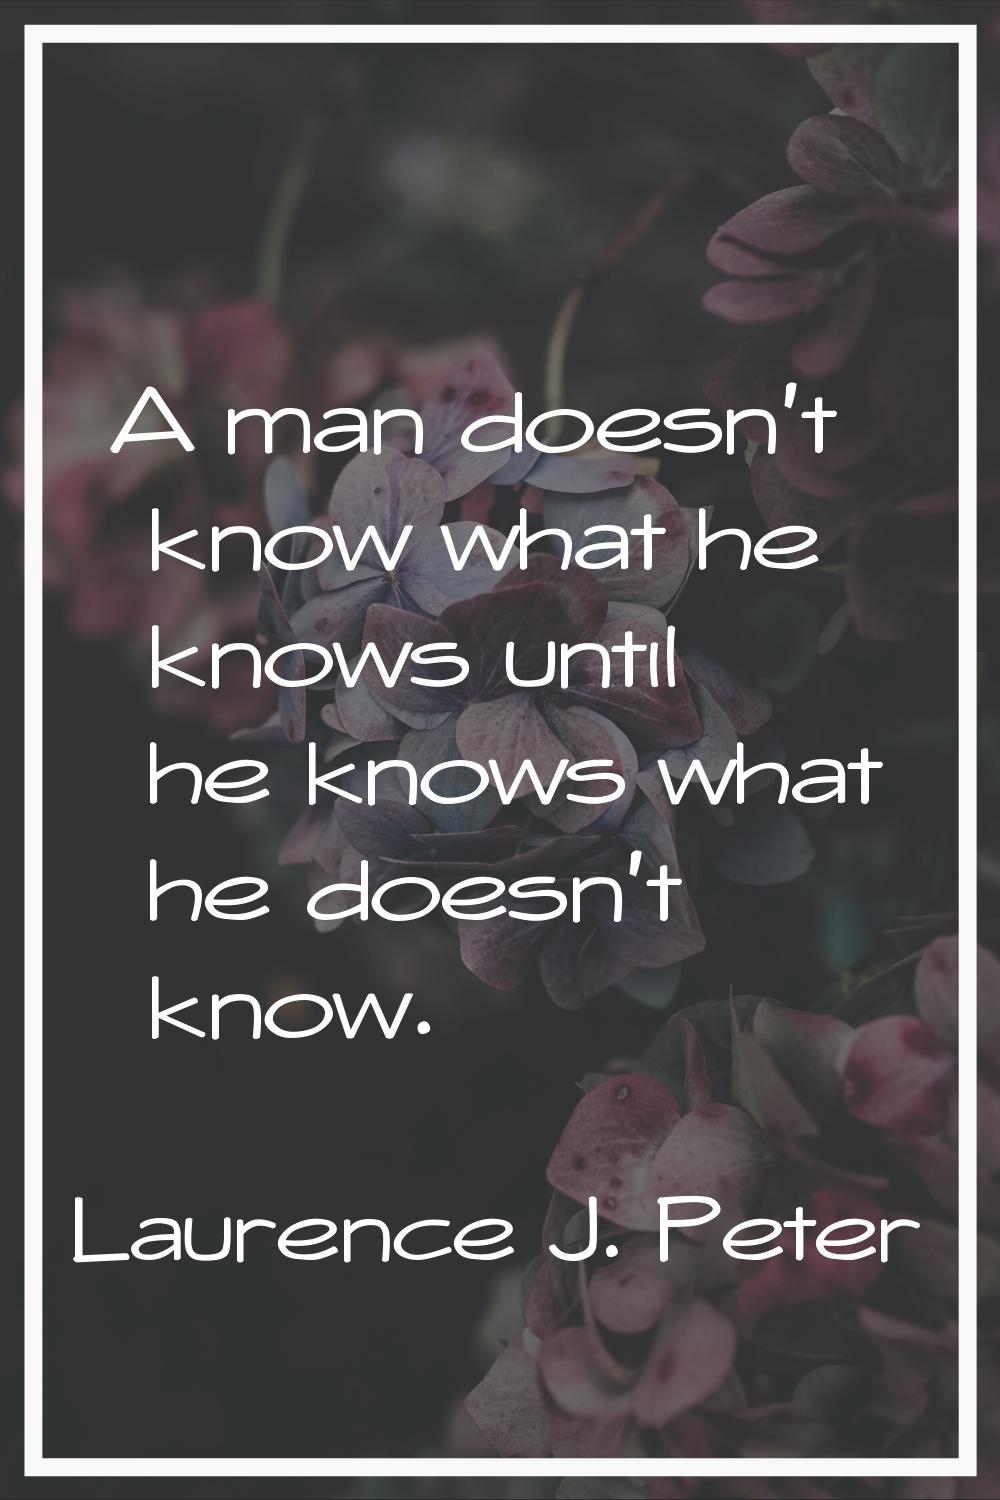 A man doesn't know what he knows until he knows what he doesn't know.